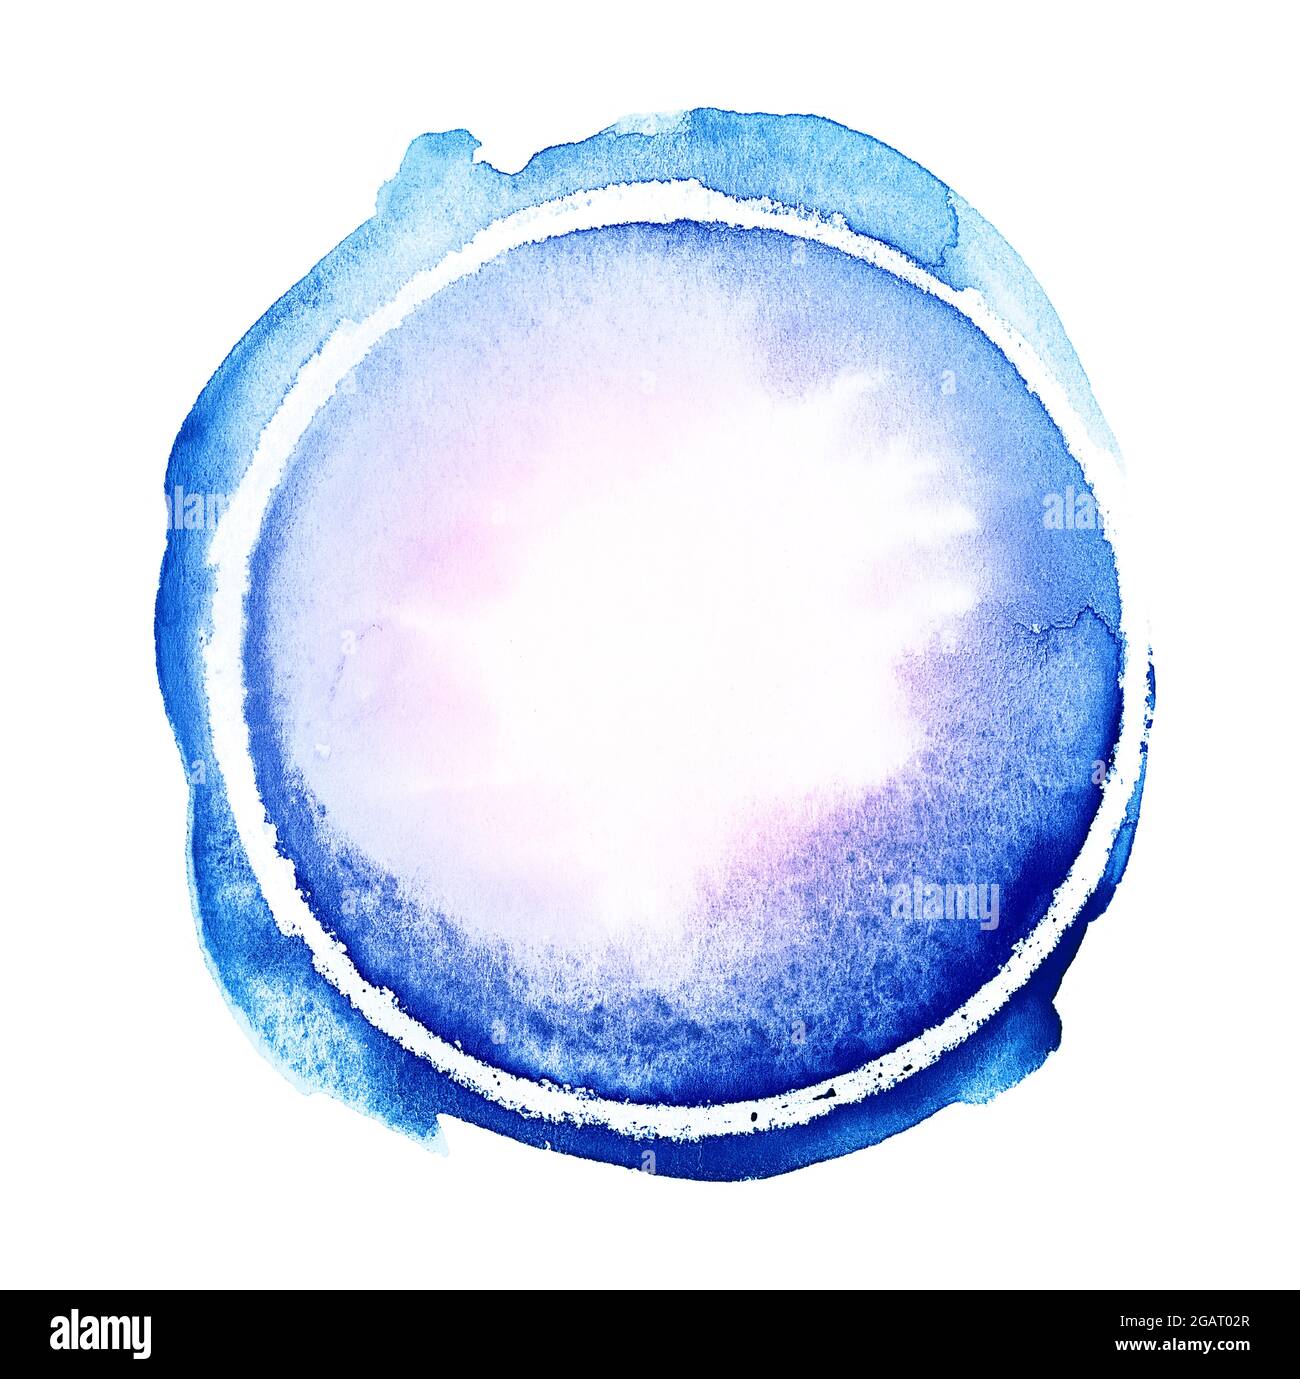 Blue freehand watercolor round circle texture splash isolated on white background with uneven edges. Blank multicolored painted design element. Stock Photo